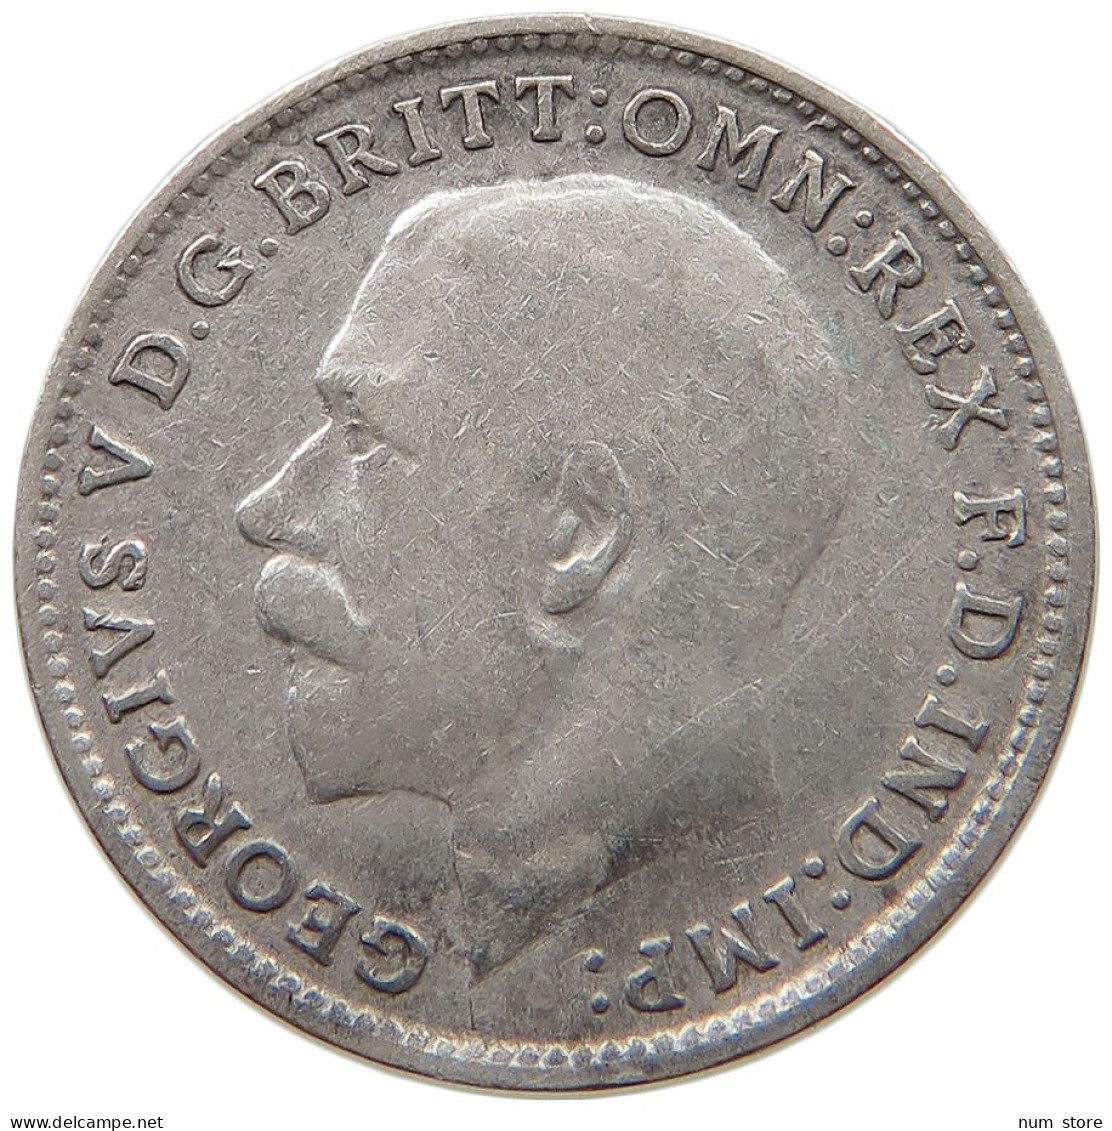 GREAT BRITAIN THREEPENCE 1914 #a033 0165 - F. 3 Pence